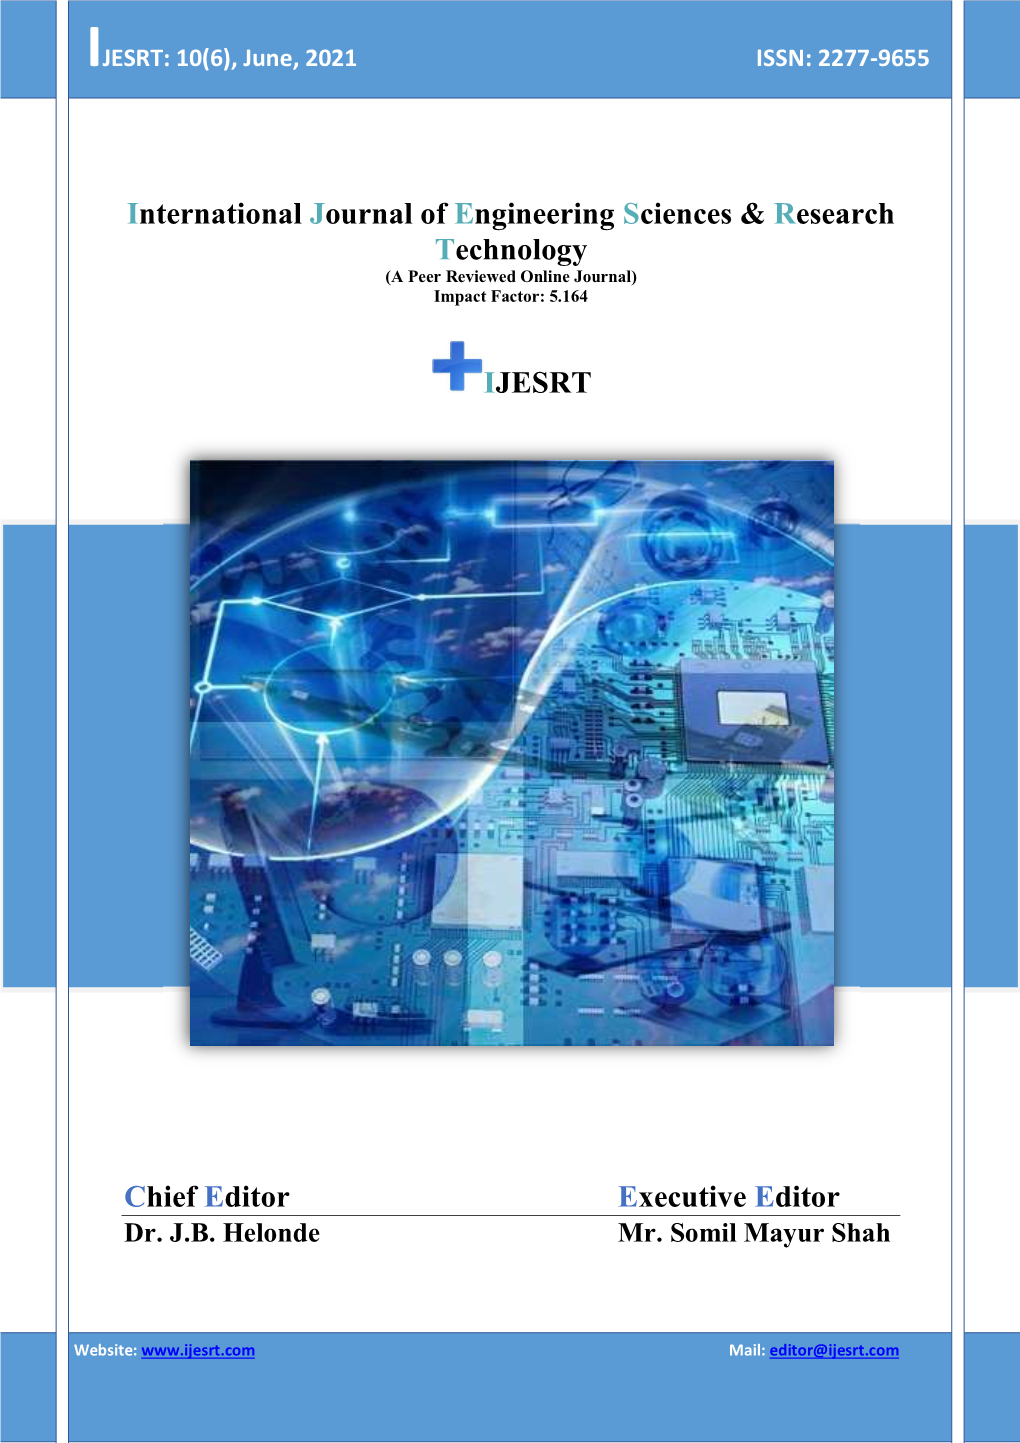 International Journal of Engineering Sciences & Research Technology